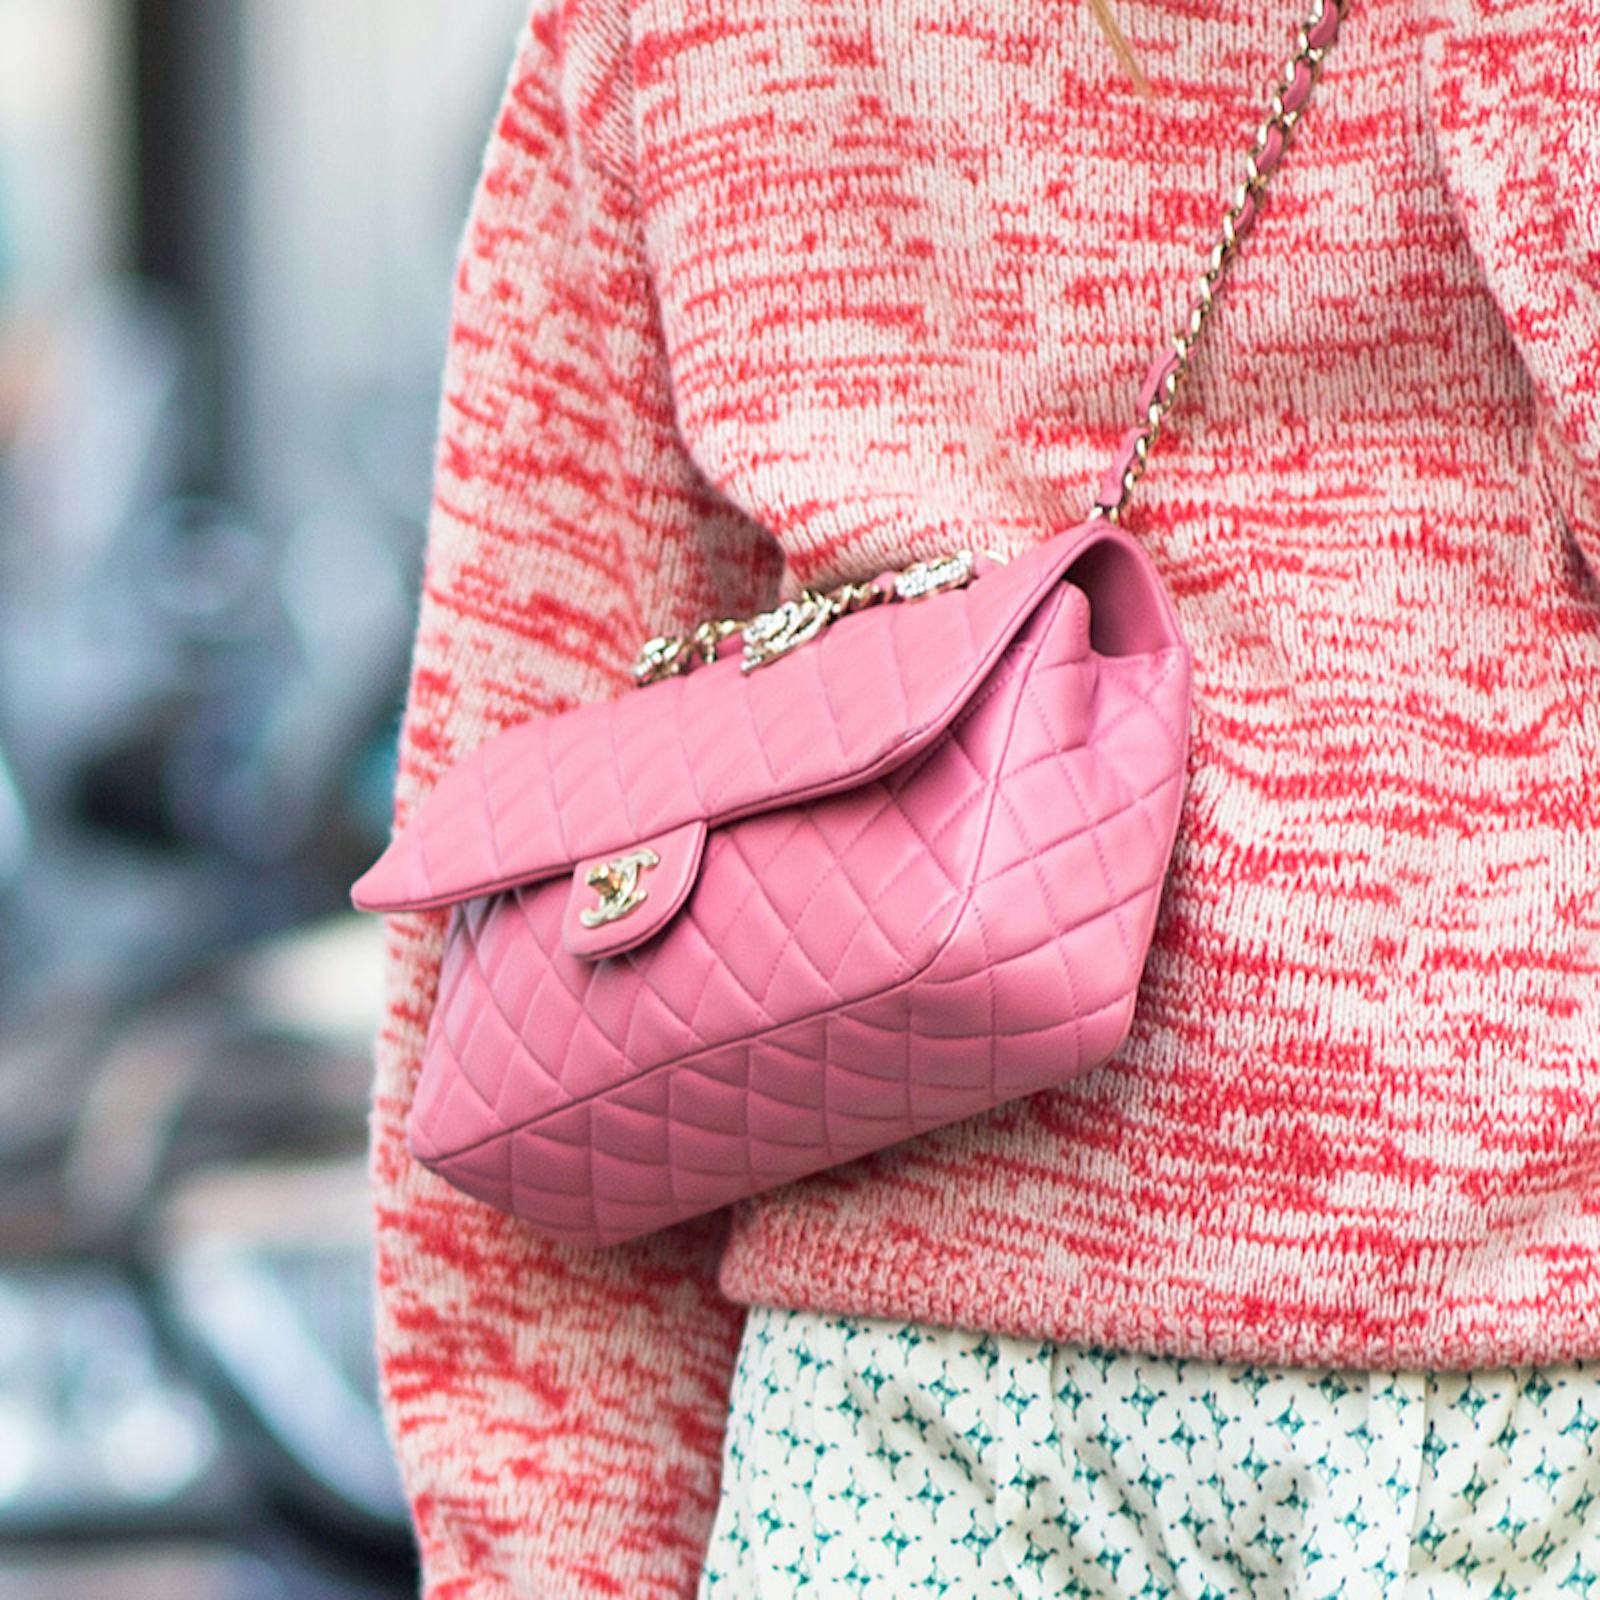 Everything You Need To Know Before Buying A Vintage Handbag